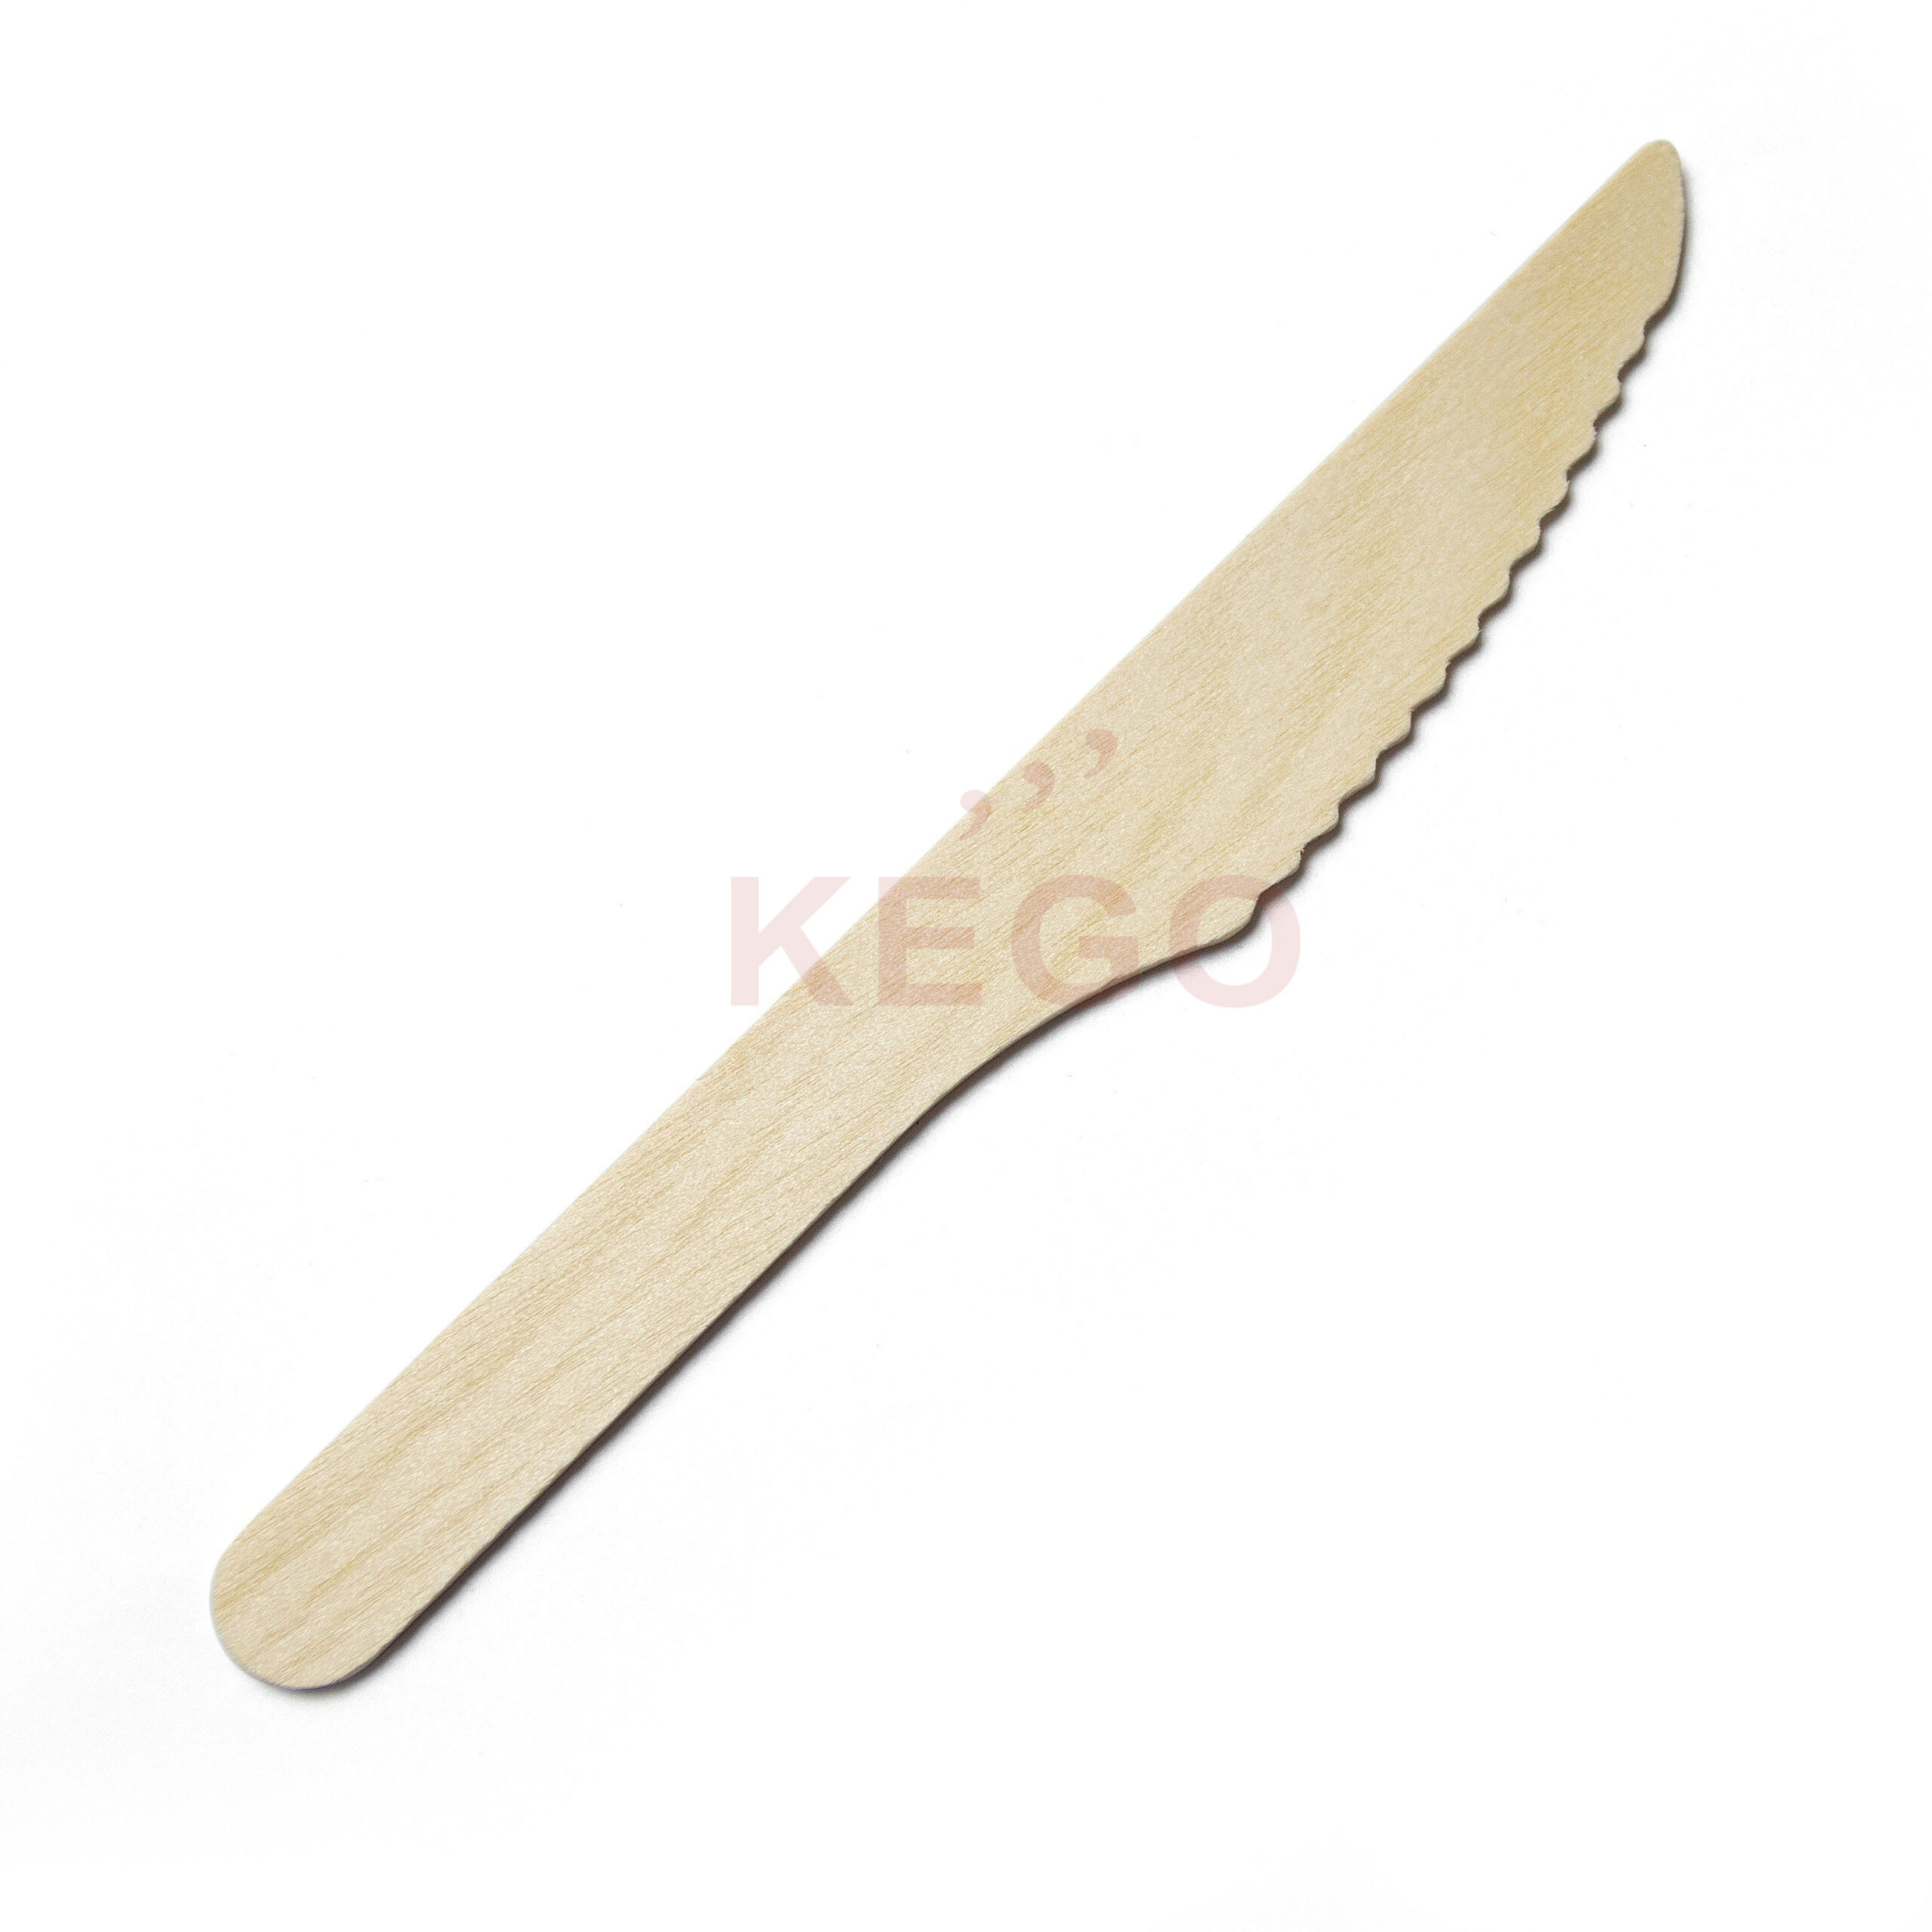 https://disposablewoodencutlery.com/wp-content/uploads/2015/09/Disposable-Wooden-Knife-165-2-scaled.jpg